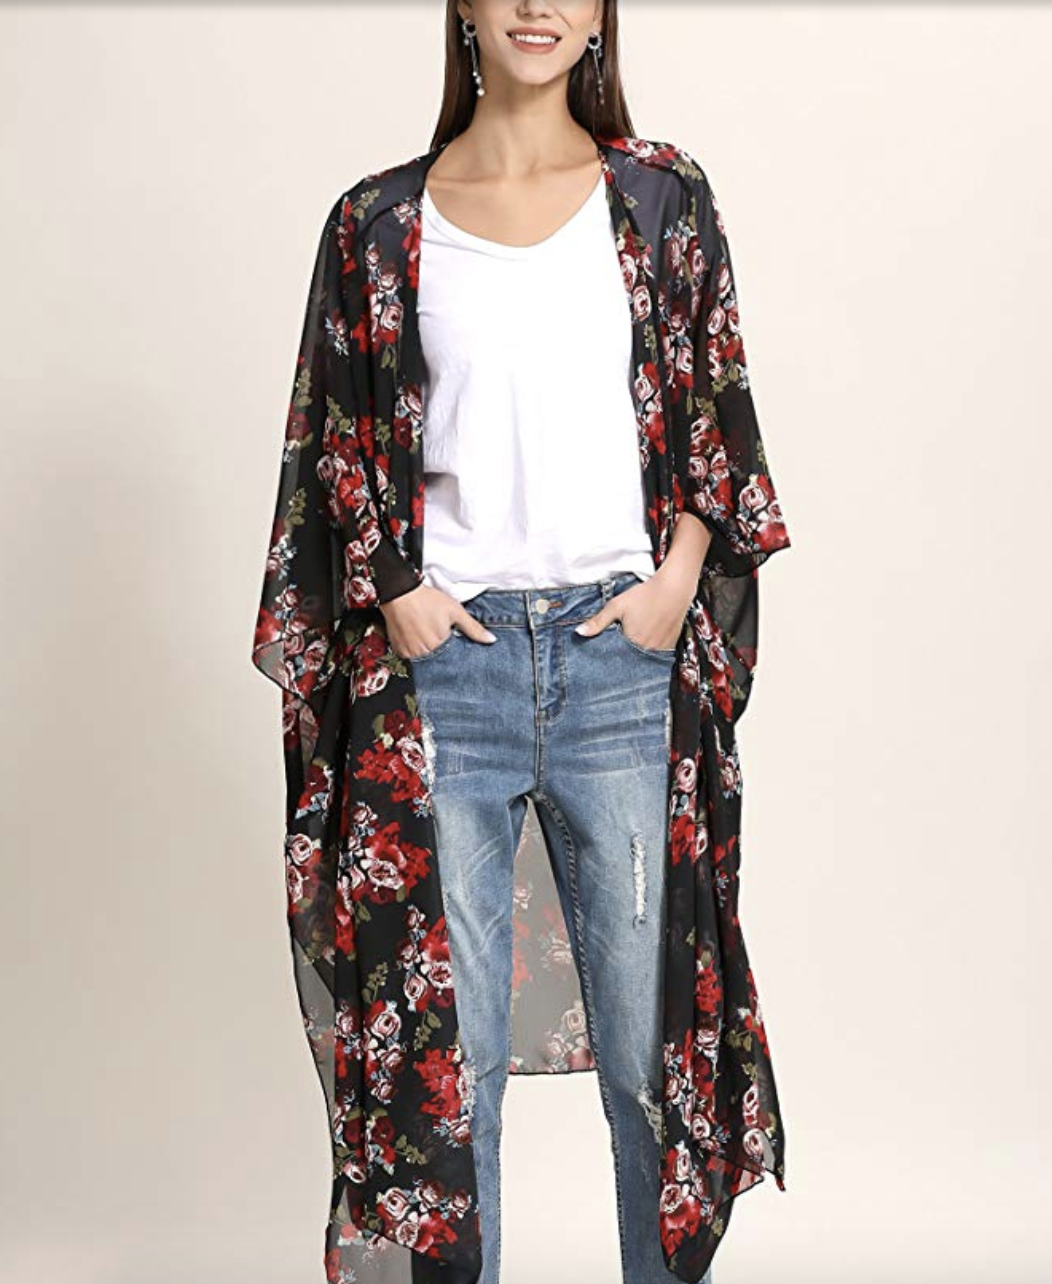 model wearing the long top in black with red and white floral pattern